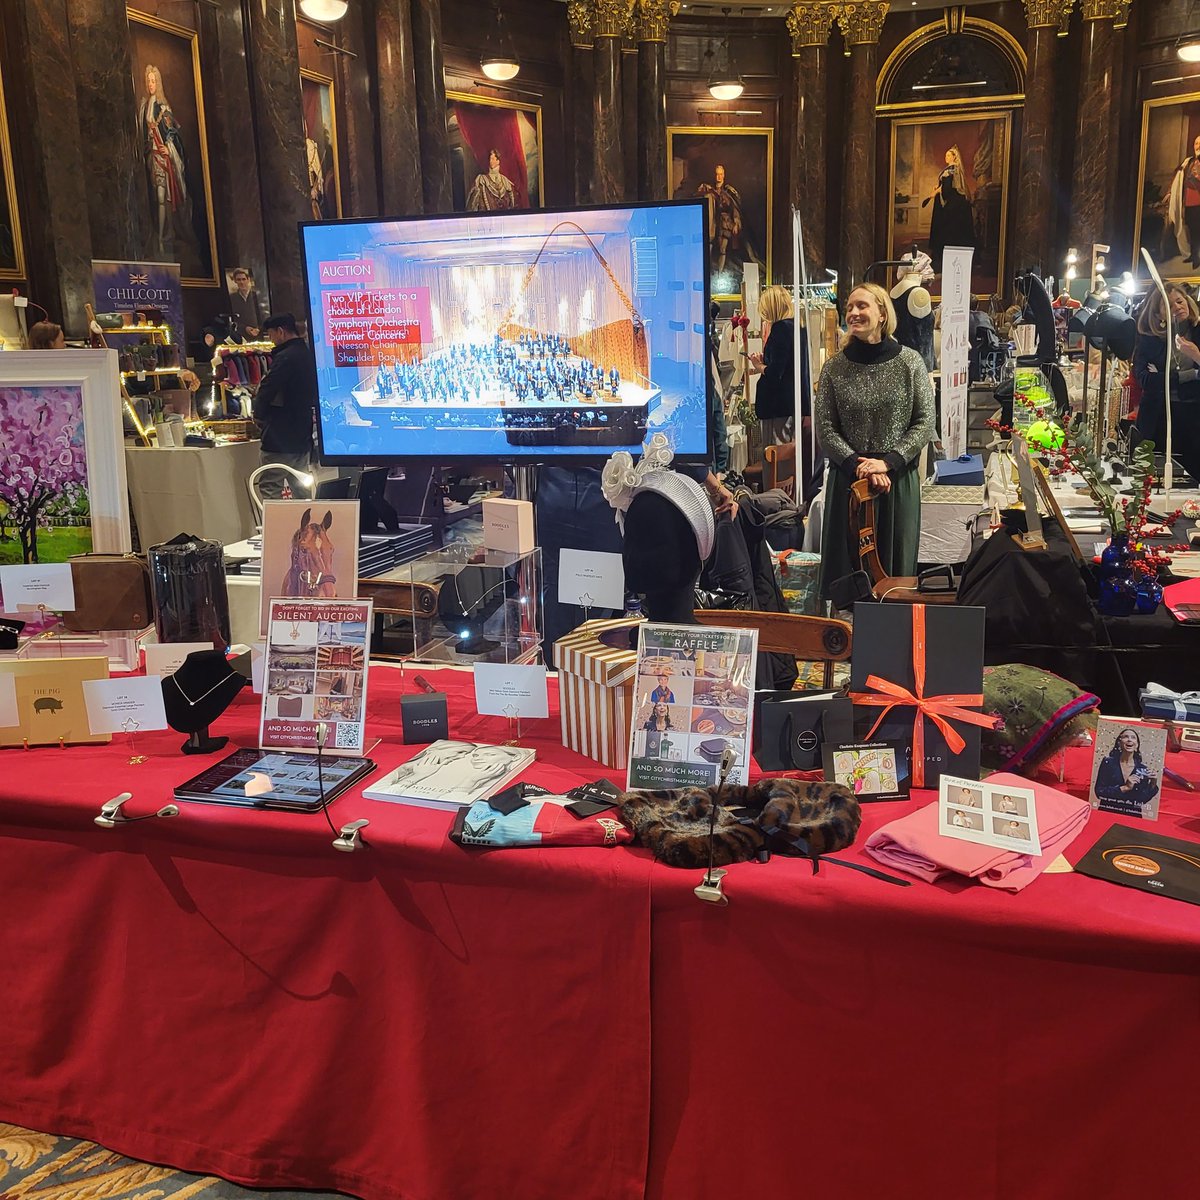 Our Raffle and Silent Auction prizes!

Winners to be drawn on the evening of the fair.

Find out more ⤵️
citychristmasfair.com/raffle